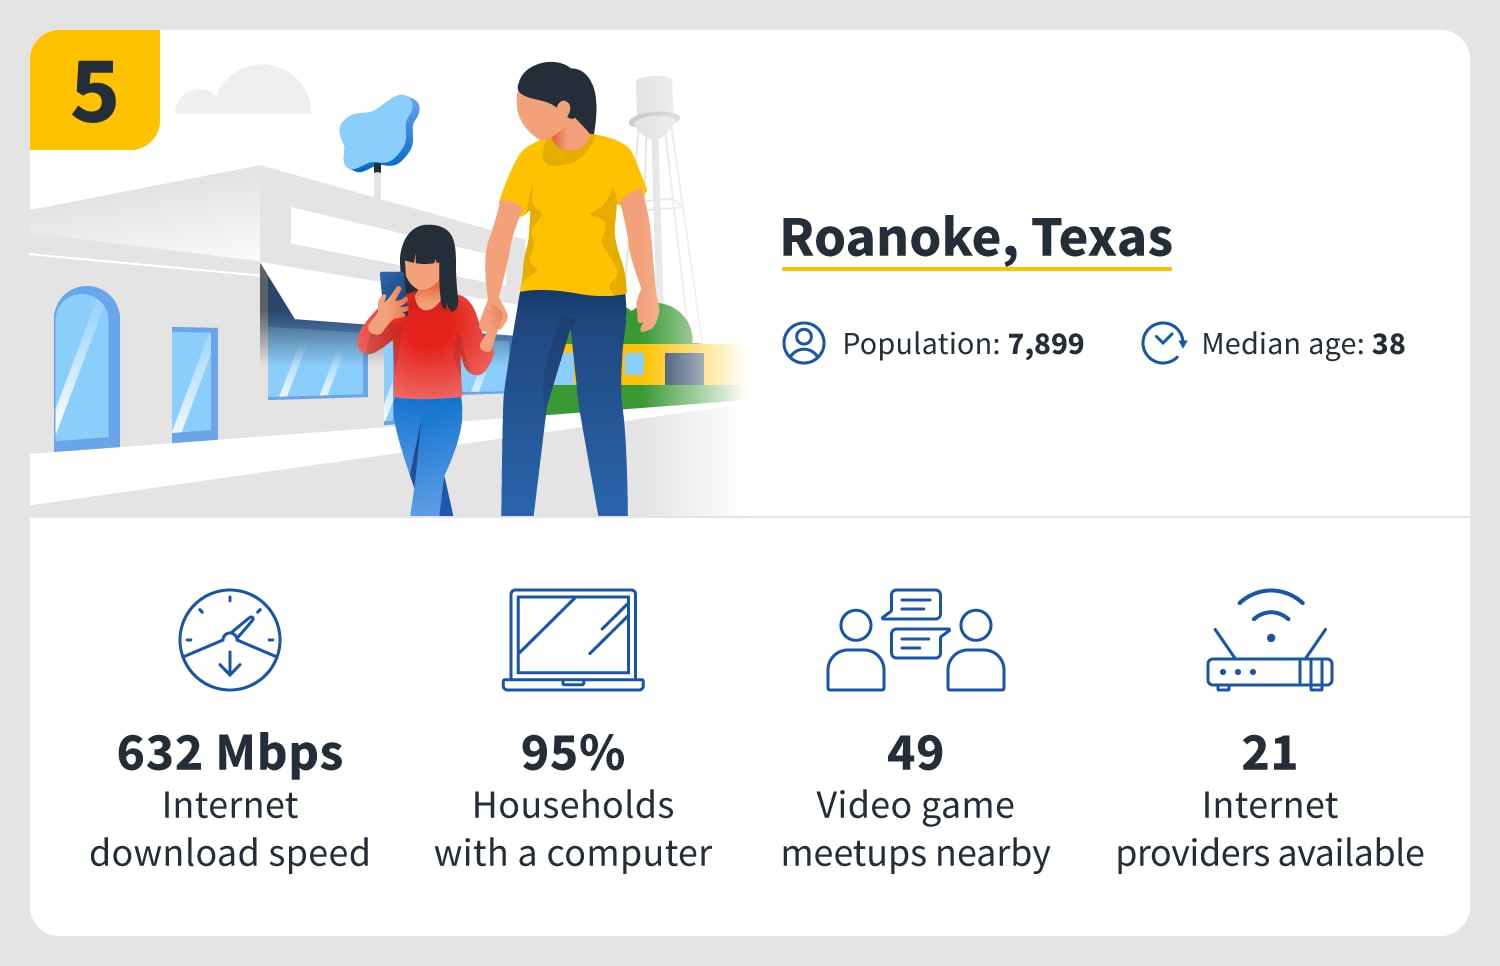 Roanoke, Texas, is the fifth best city for gaming in the U.S.